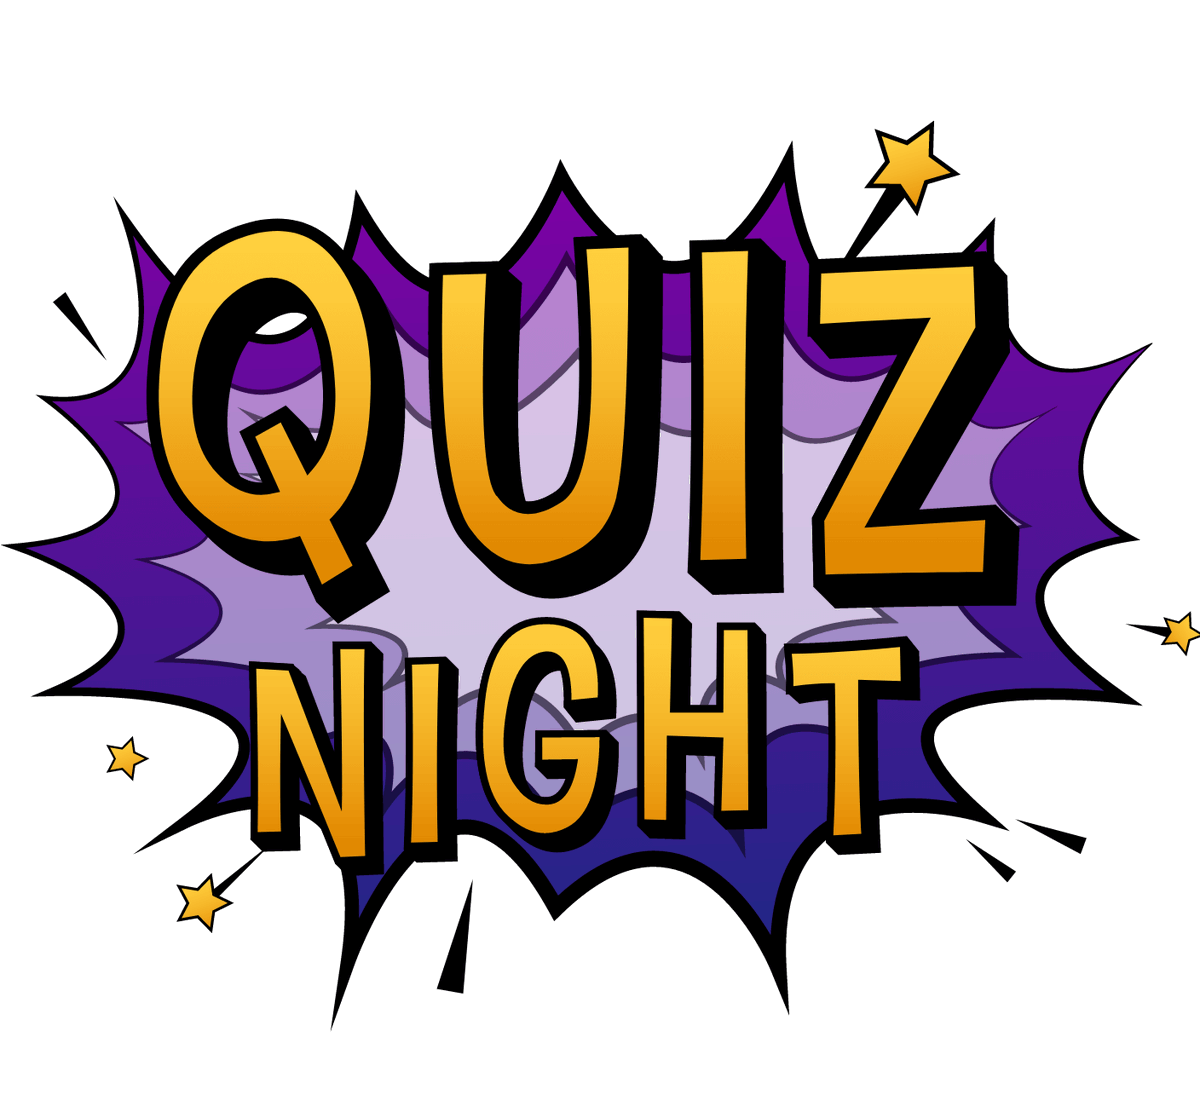 Don't forget our earlier start time of 8pm for our weekly Quiz & Bingo.. Picture round starts at 8pm Questions at 8.30pm Who will be taking home the winnings this evening?? #quiznight #realale #winnings #nightout